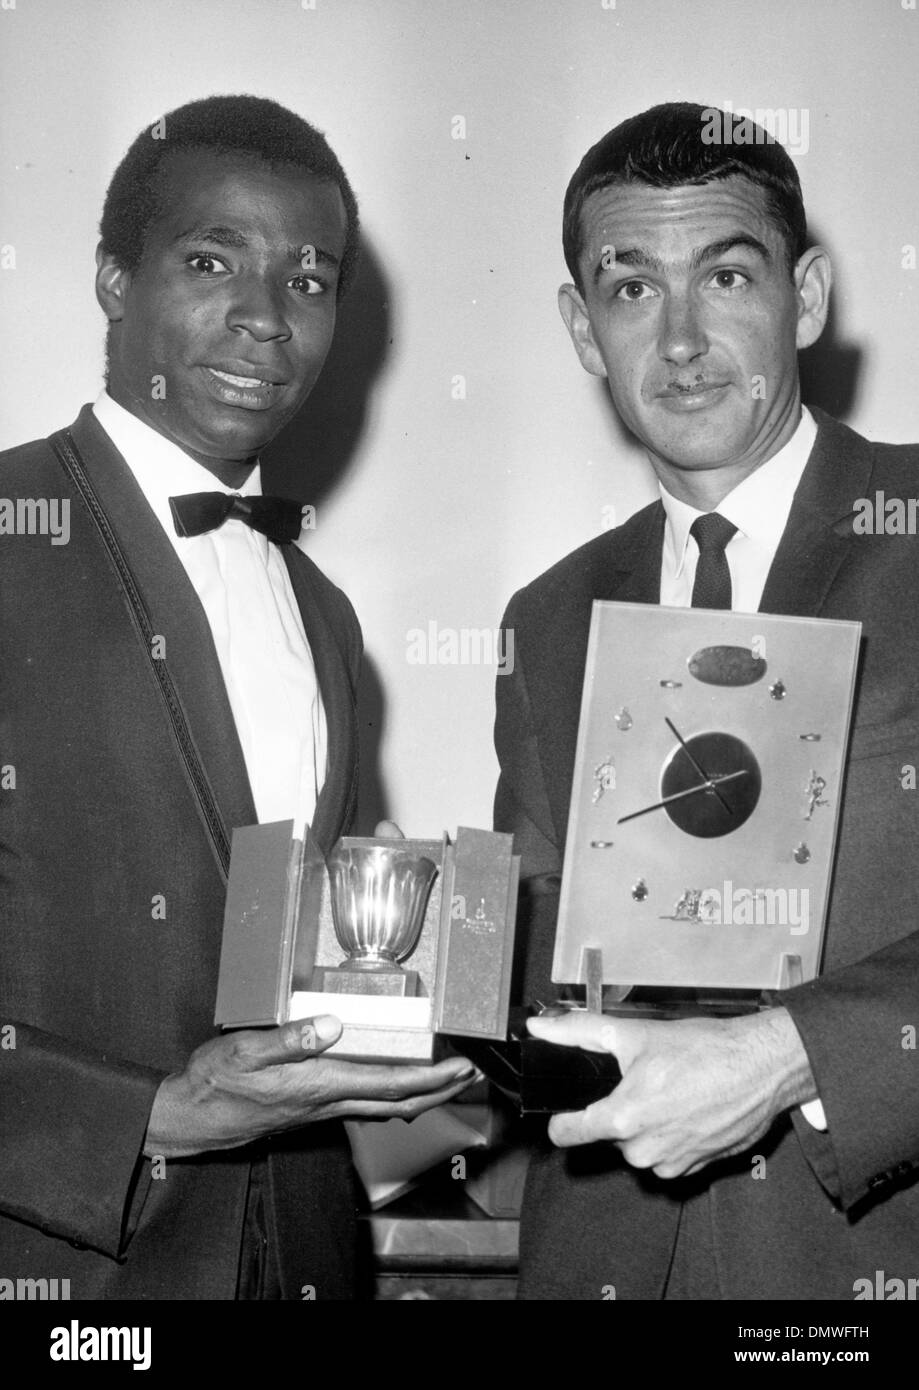 Jun 16, 1967 - Paris, France - (File Photo) RON CLARKE (Ronald William Clarke) is an Australian athlete, and one of the best known middle and long distance runners of the 1960's. He is best remembered for setting seventeen world records. He won the bronze medal in the 10,000 m at the 1964 Summer Olympics, but never won an Olympic gold medal. At the 1968 Summer Olympics in Mexico Ci Stock Photo